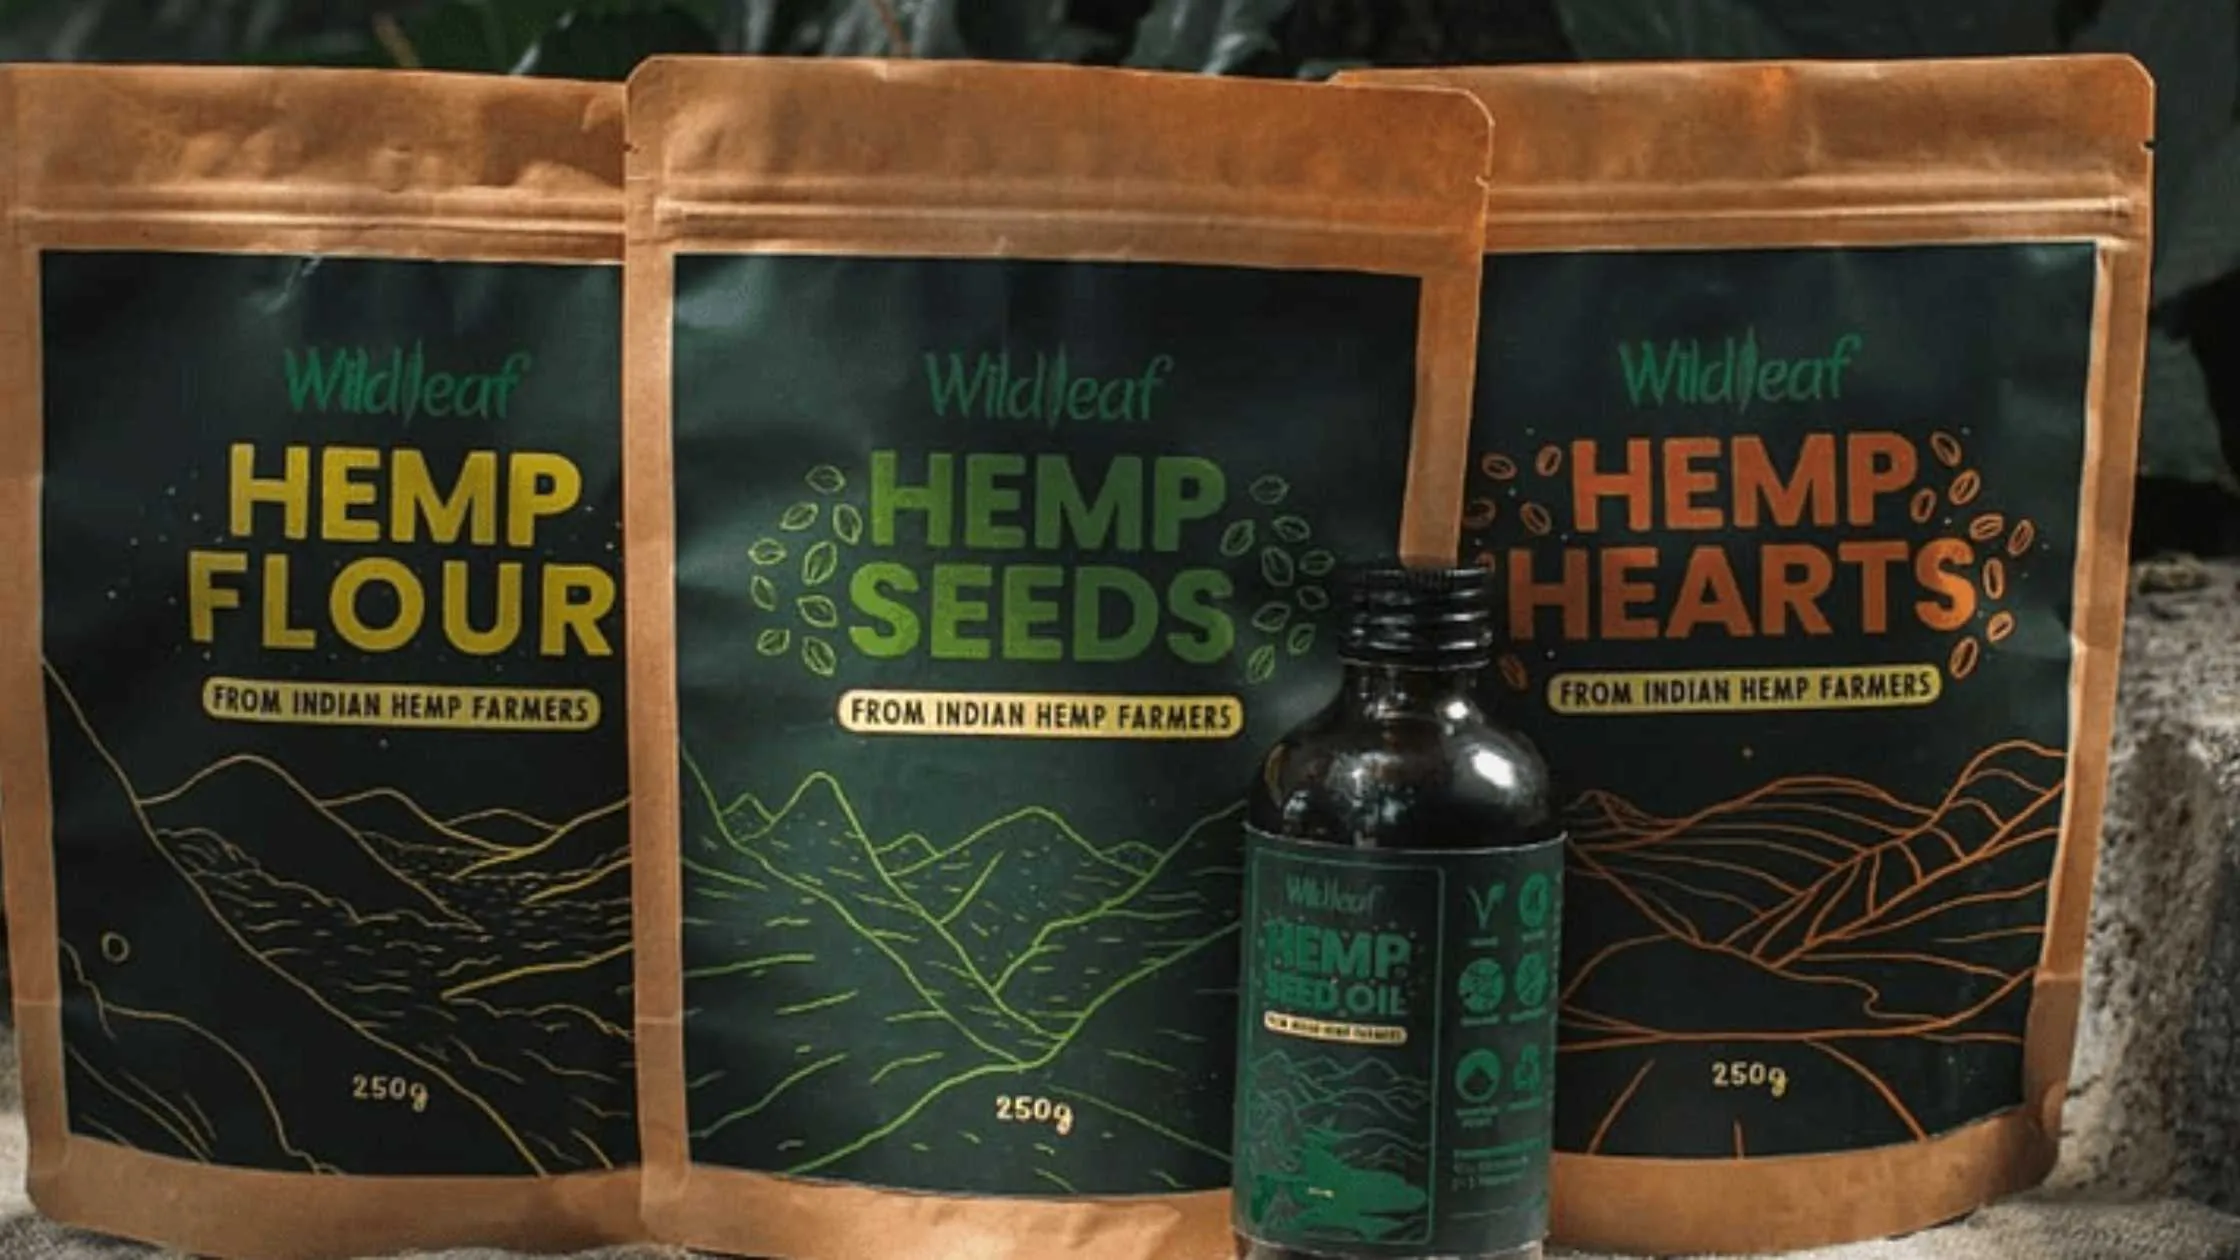 What is Wildleaf Cultivating Hemp Culture?